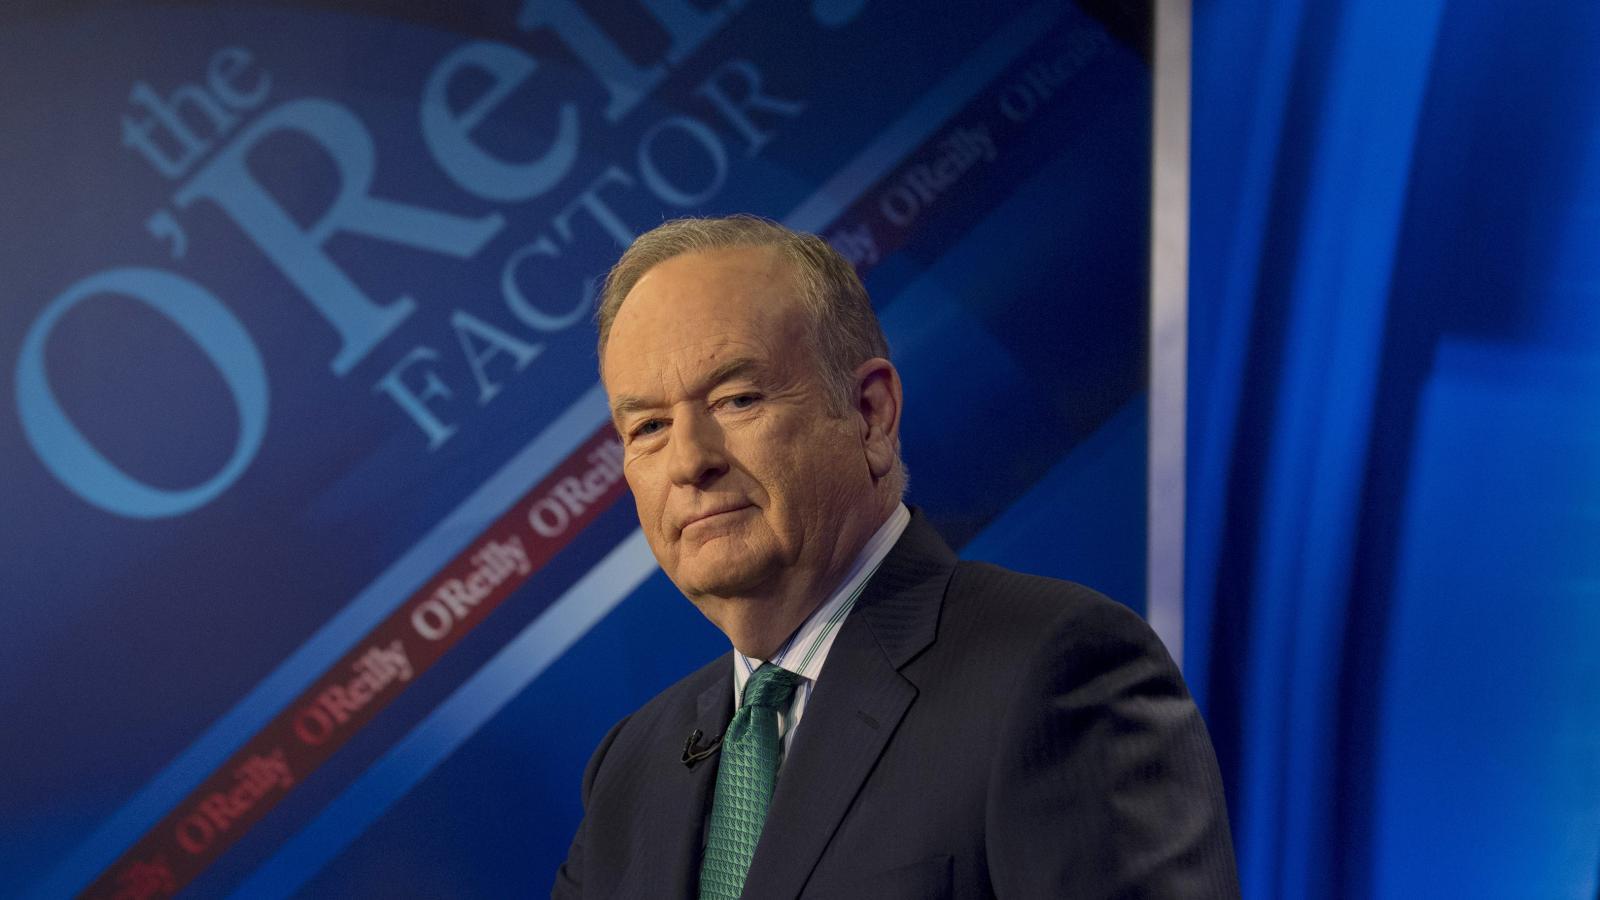 Rupert Murdoch and Fox had to fire Bill O'Reilly to avoid losing